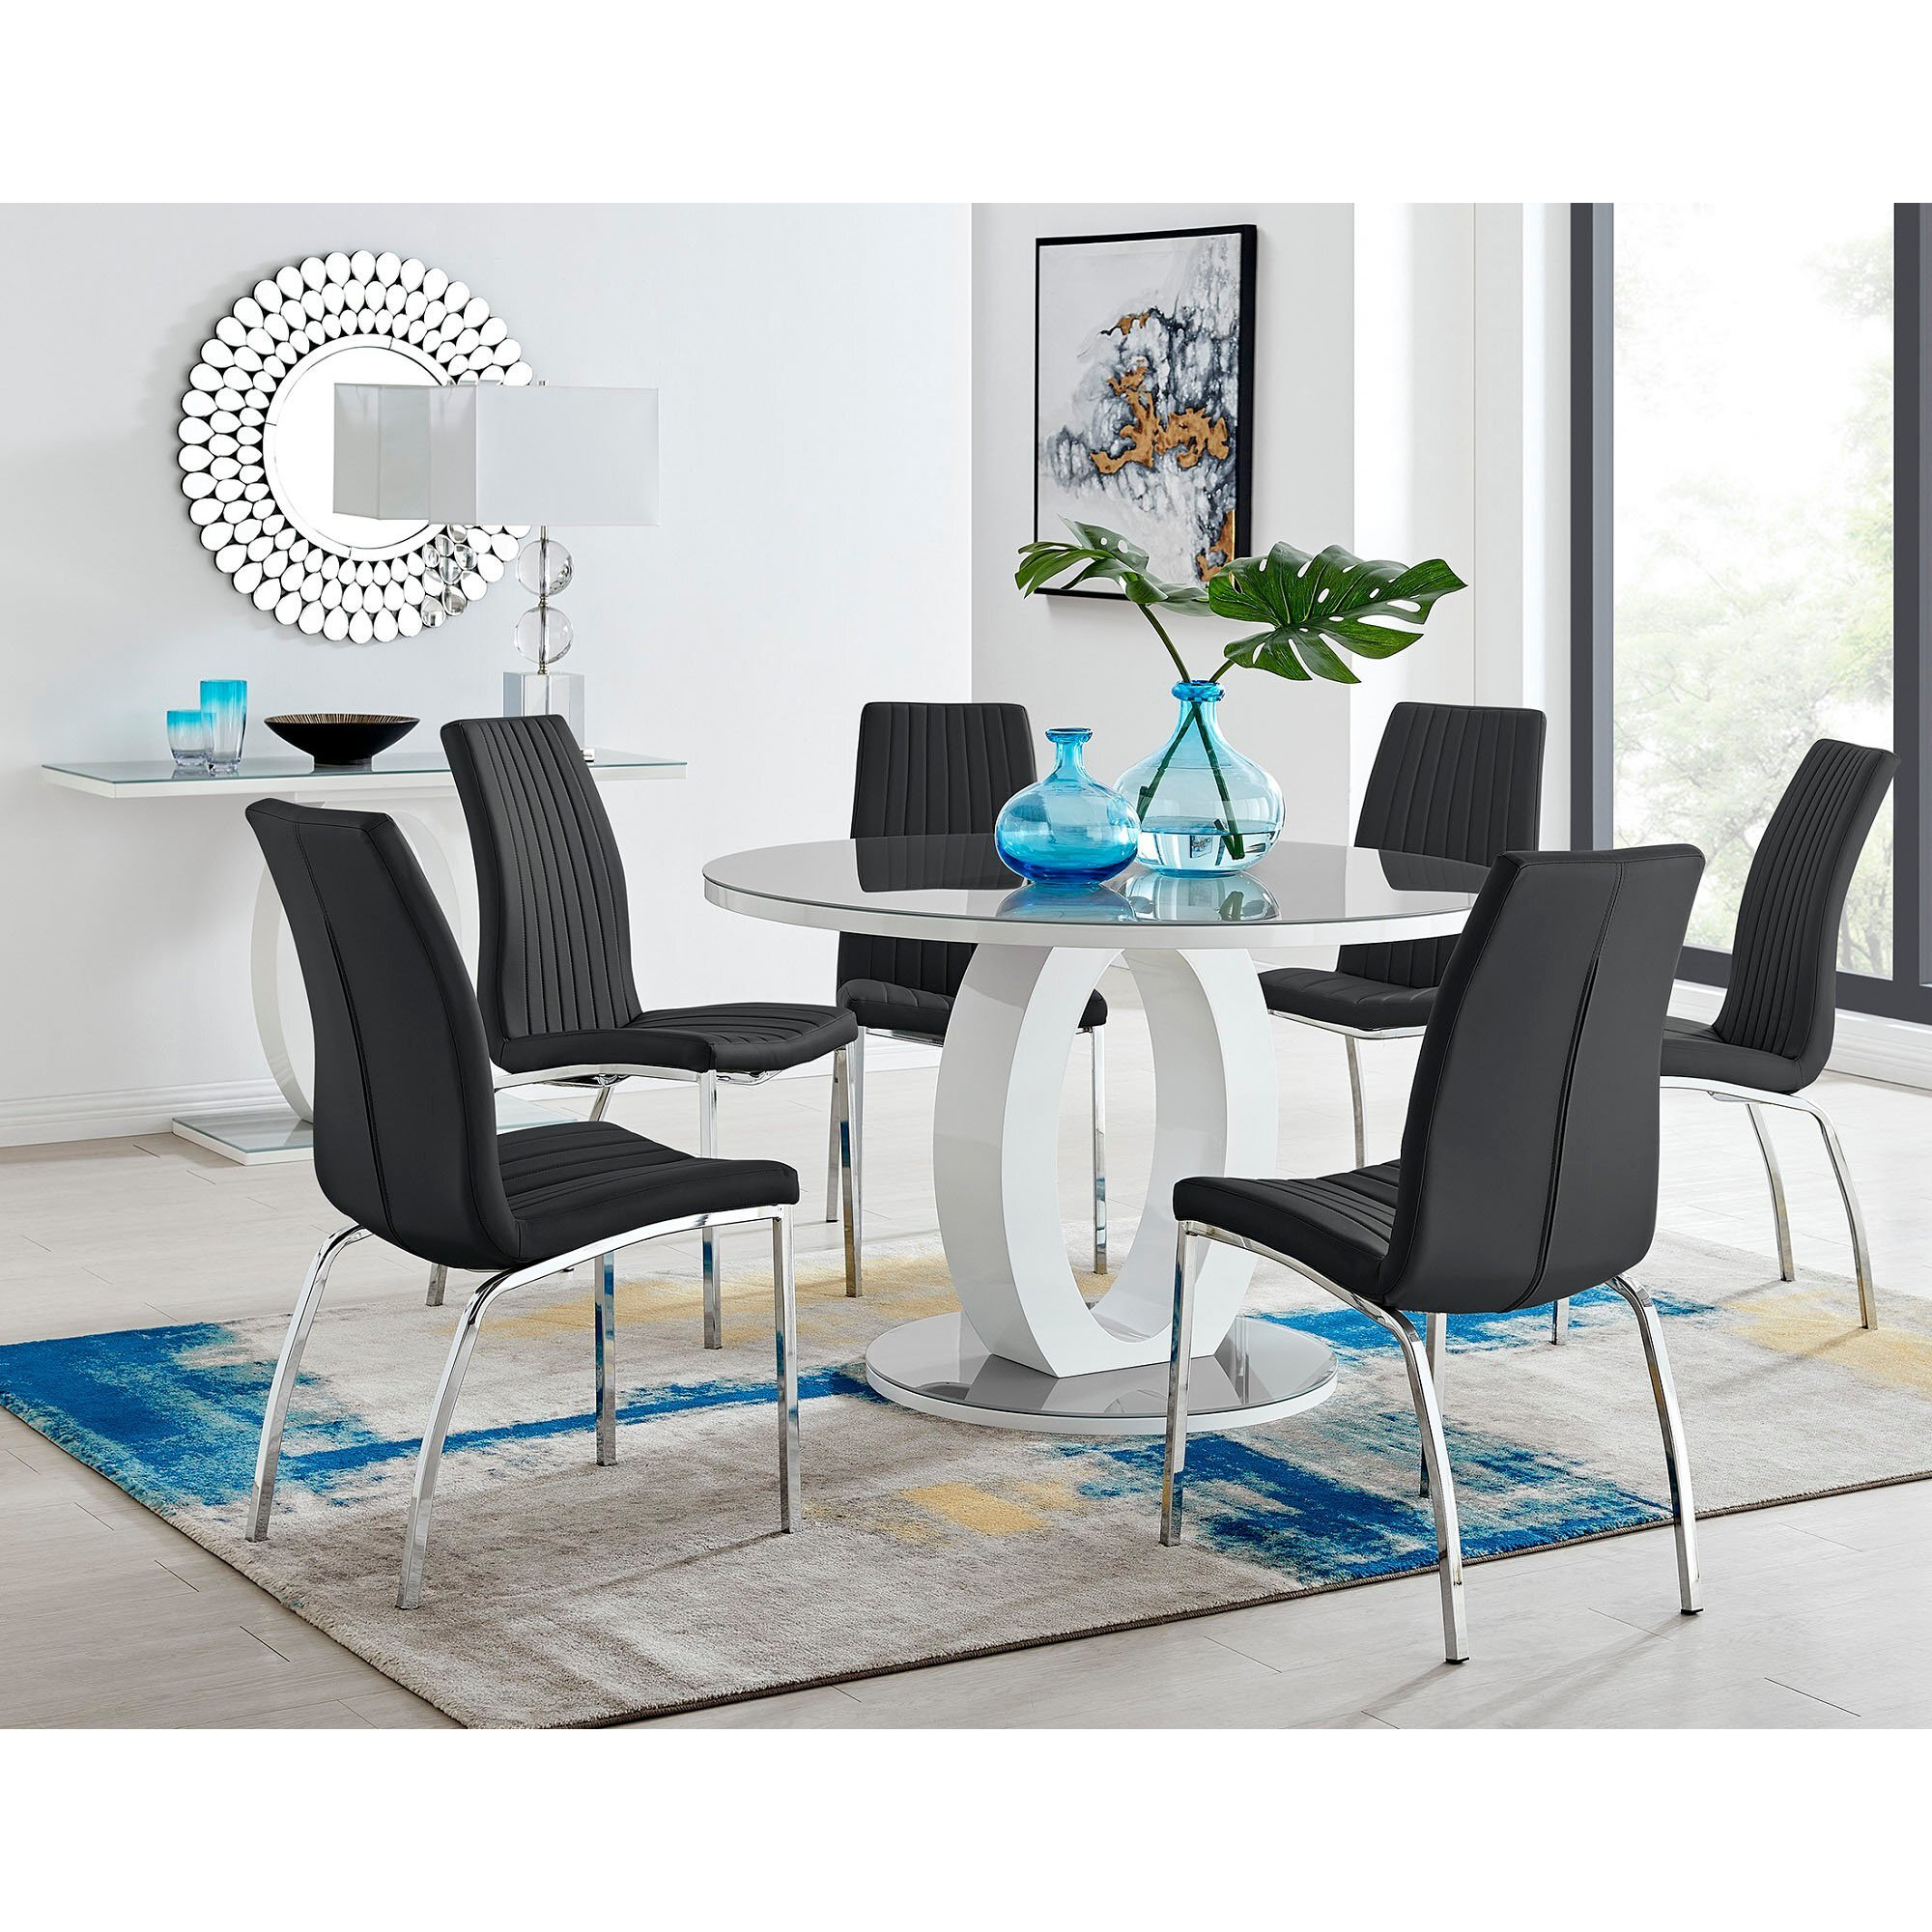 Giovani Grey White High Gloss And Glass Large Round Dining Table And 6 Isco Chairs Set